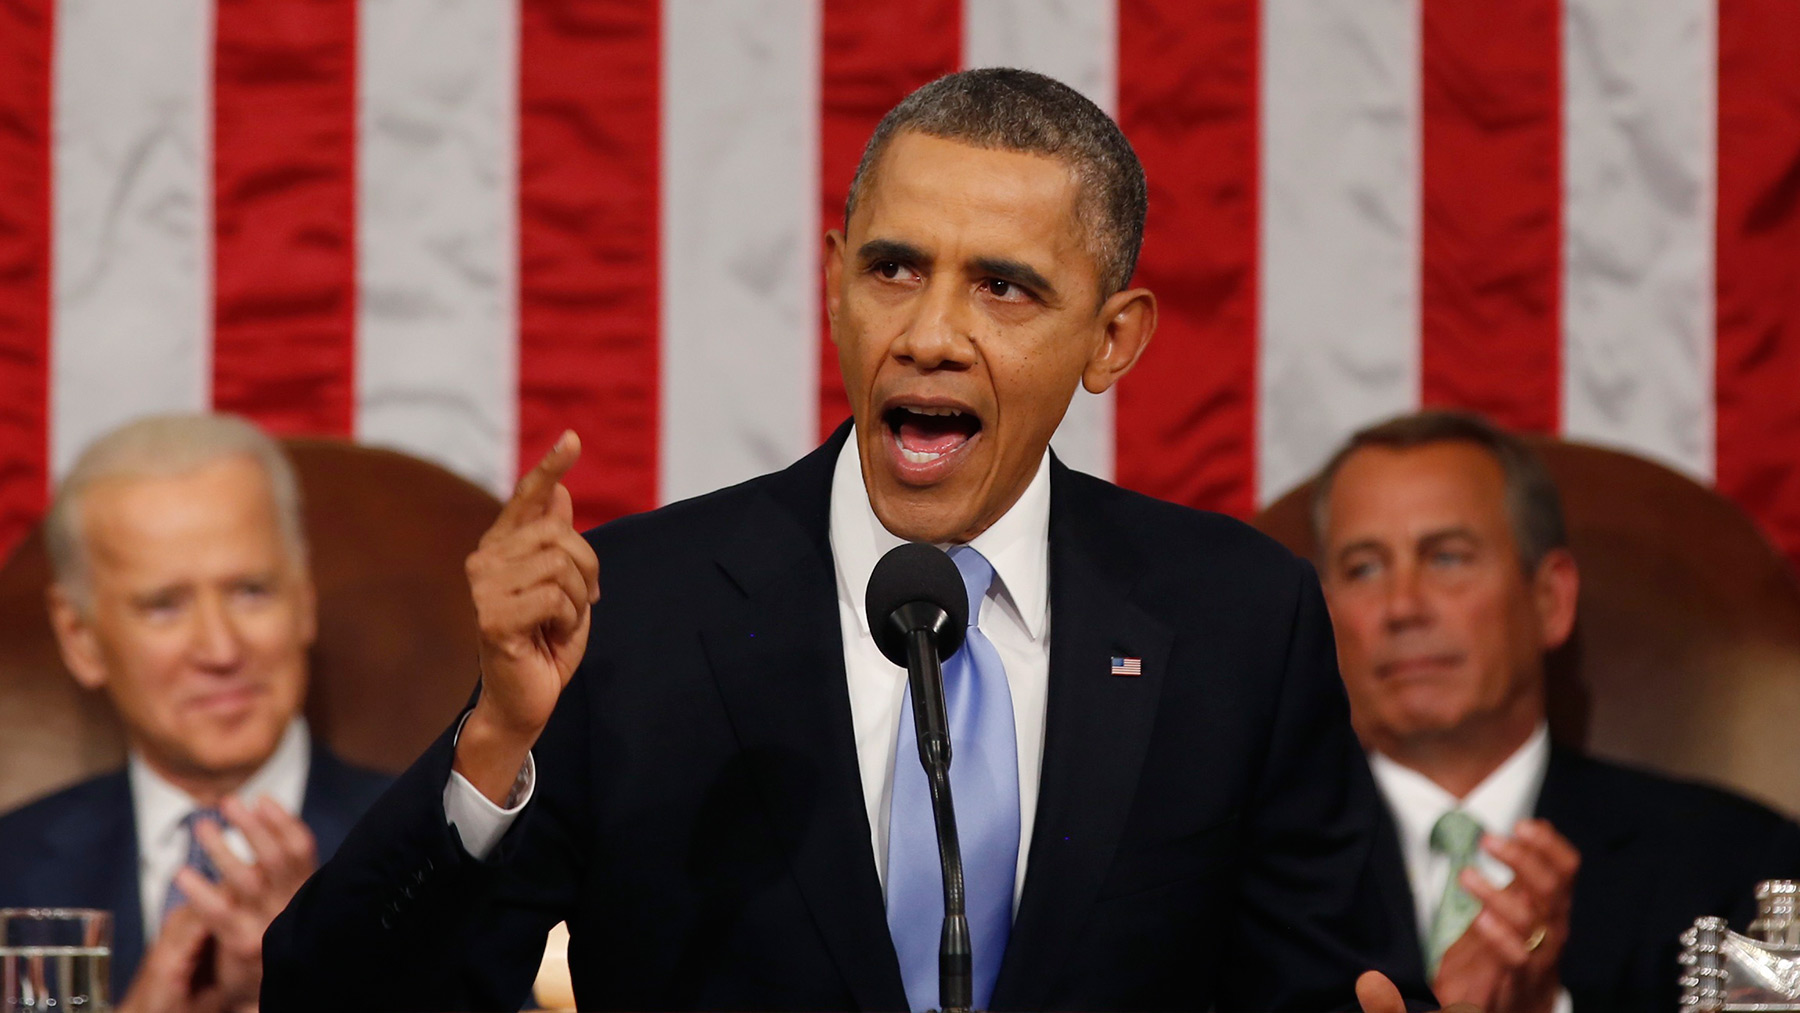 U.S. President Barack Obama delivers his State of the Union speech on Capitol Hill in Washington, January 28, 2014.